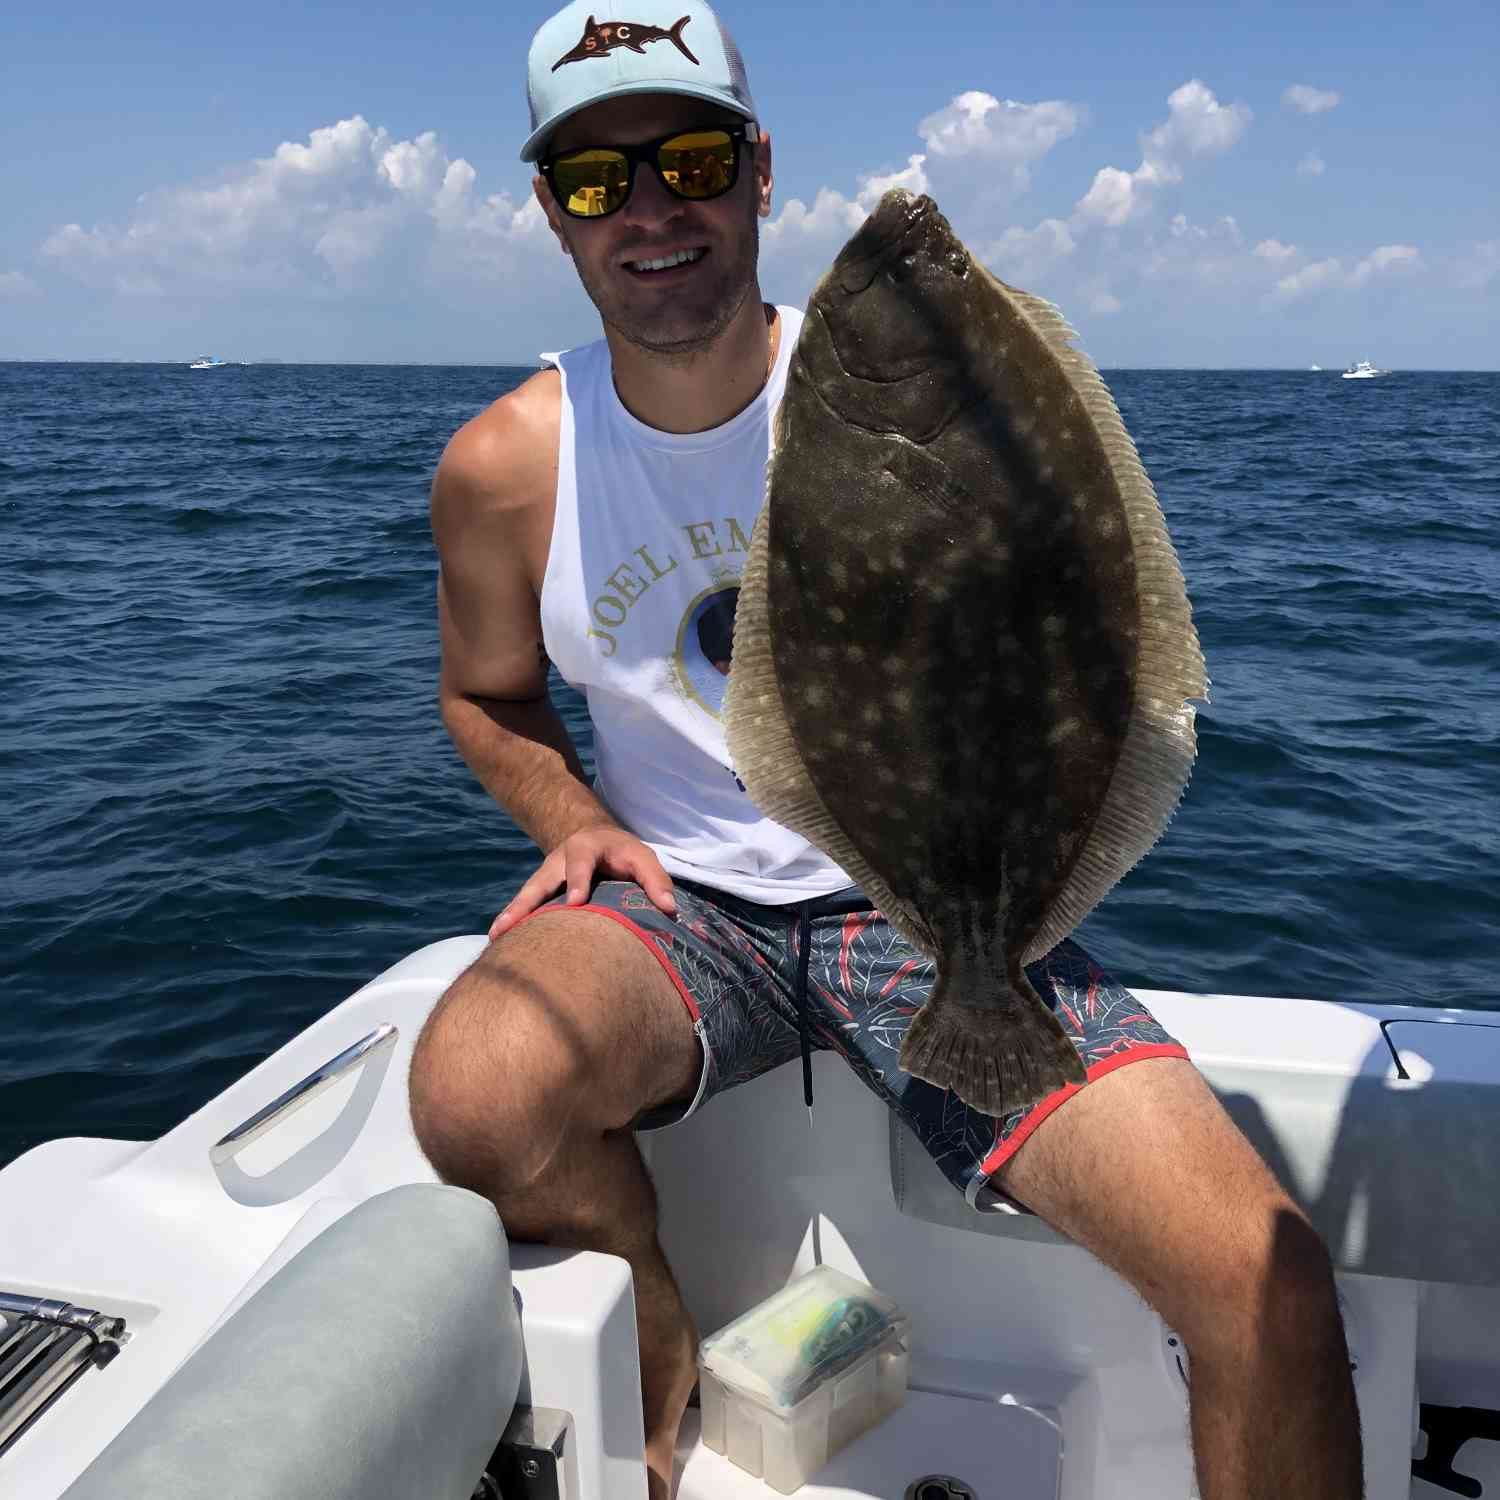 Title: First Doormat - On board their Sportsman Open 212 Center Console - Location: Avalon, NJ. Participating in the Photo Contest #SportsmanAugust2020